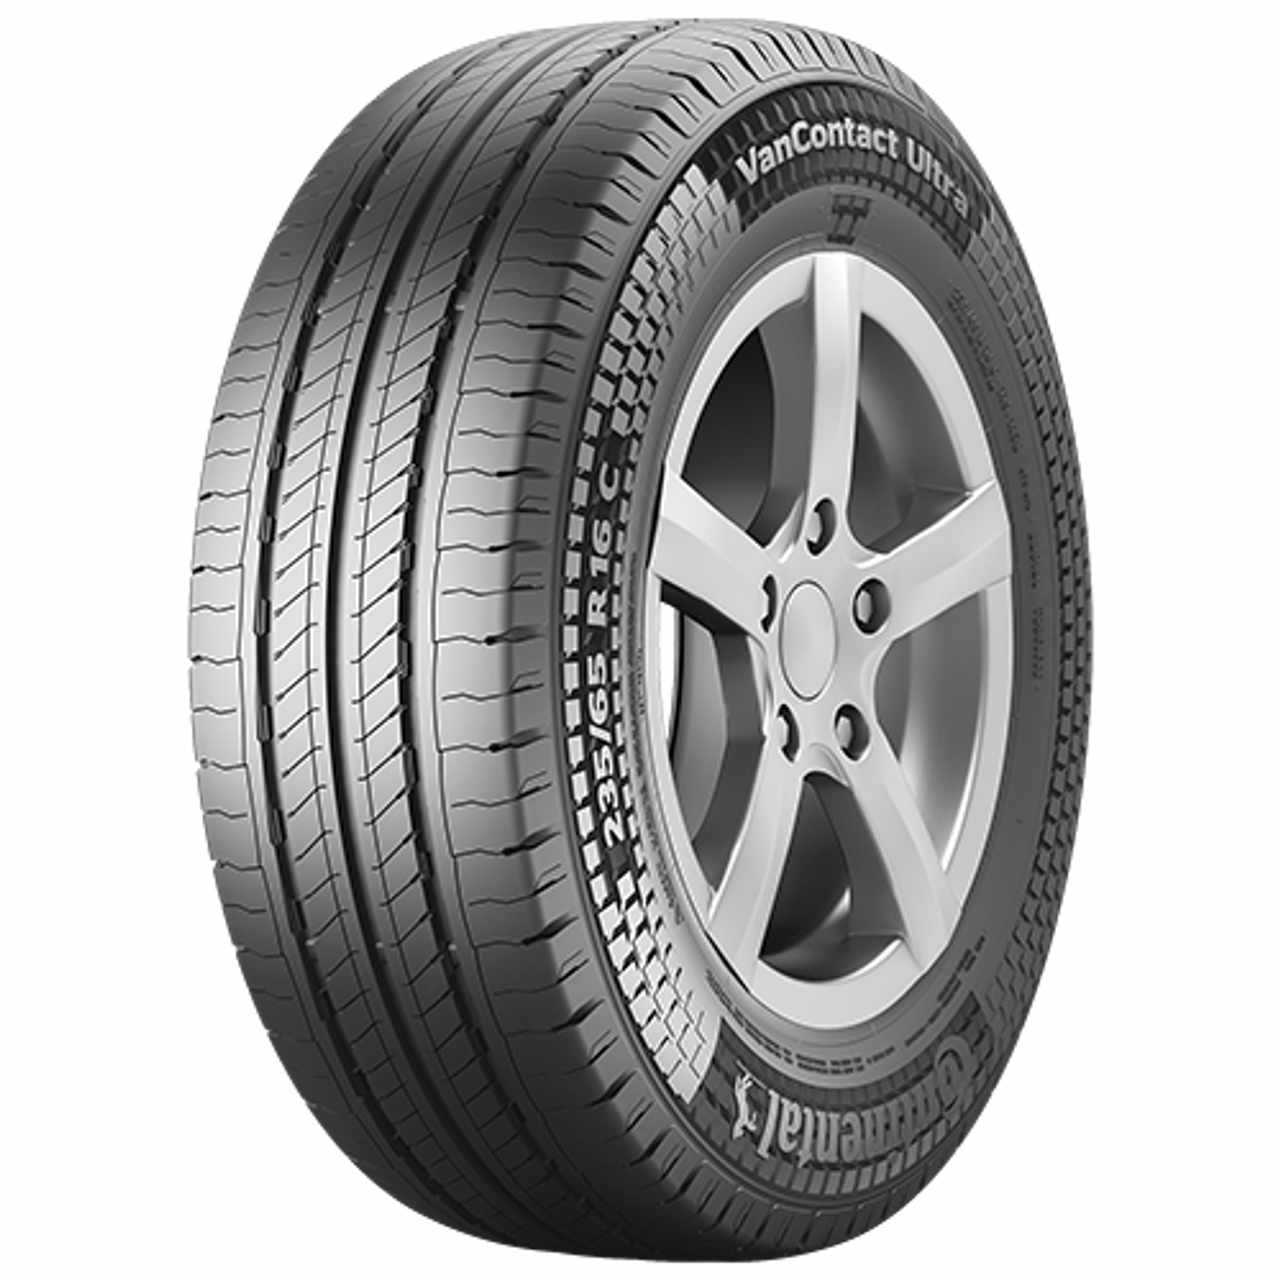 CONTINENTAL VANCONTACT ULTRA 195/70R15C 104R BSW